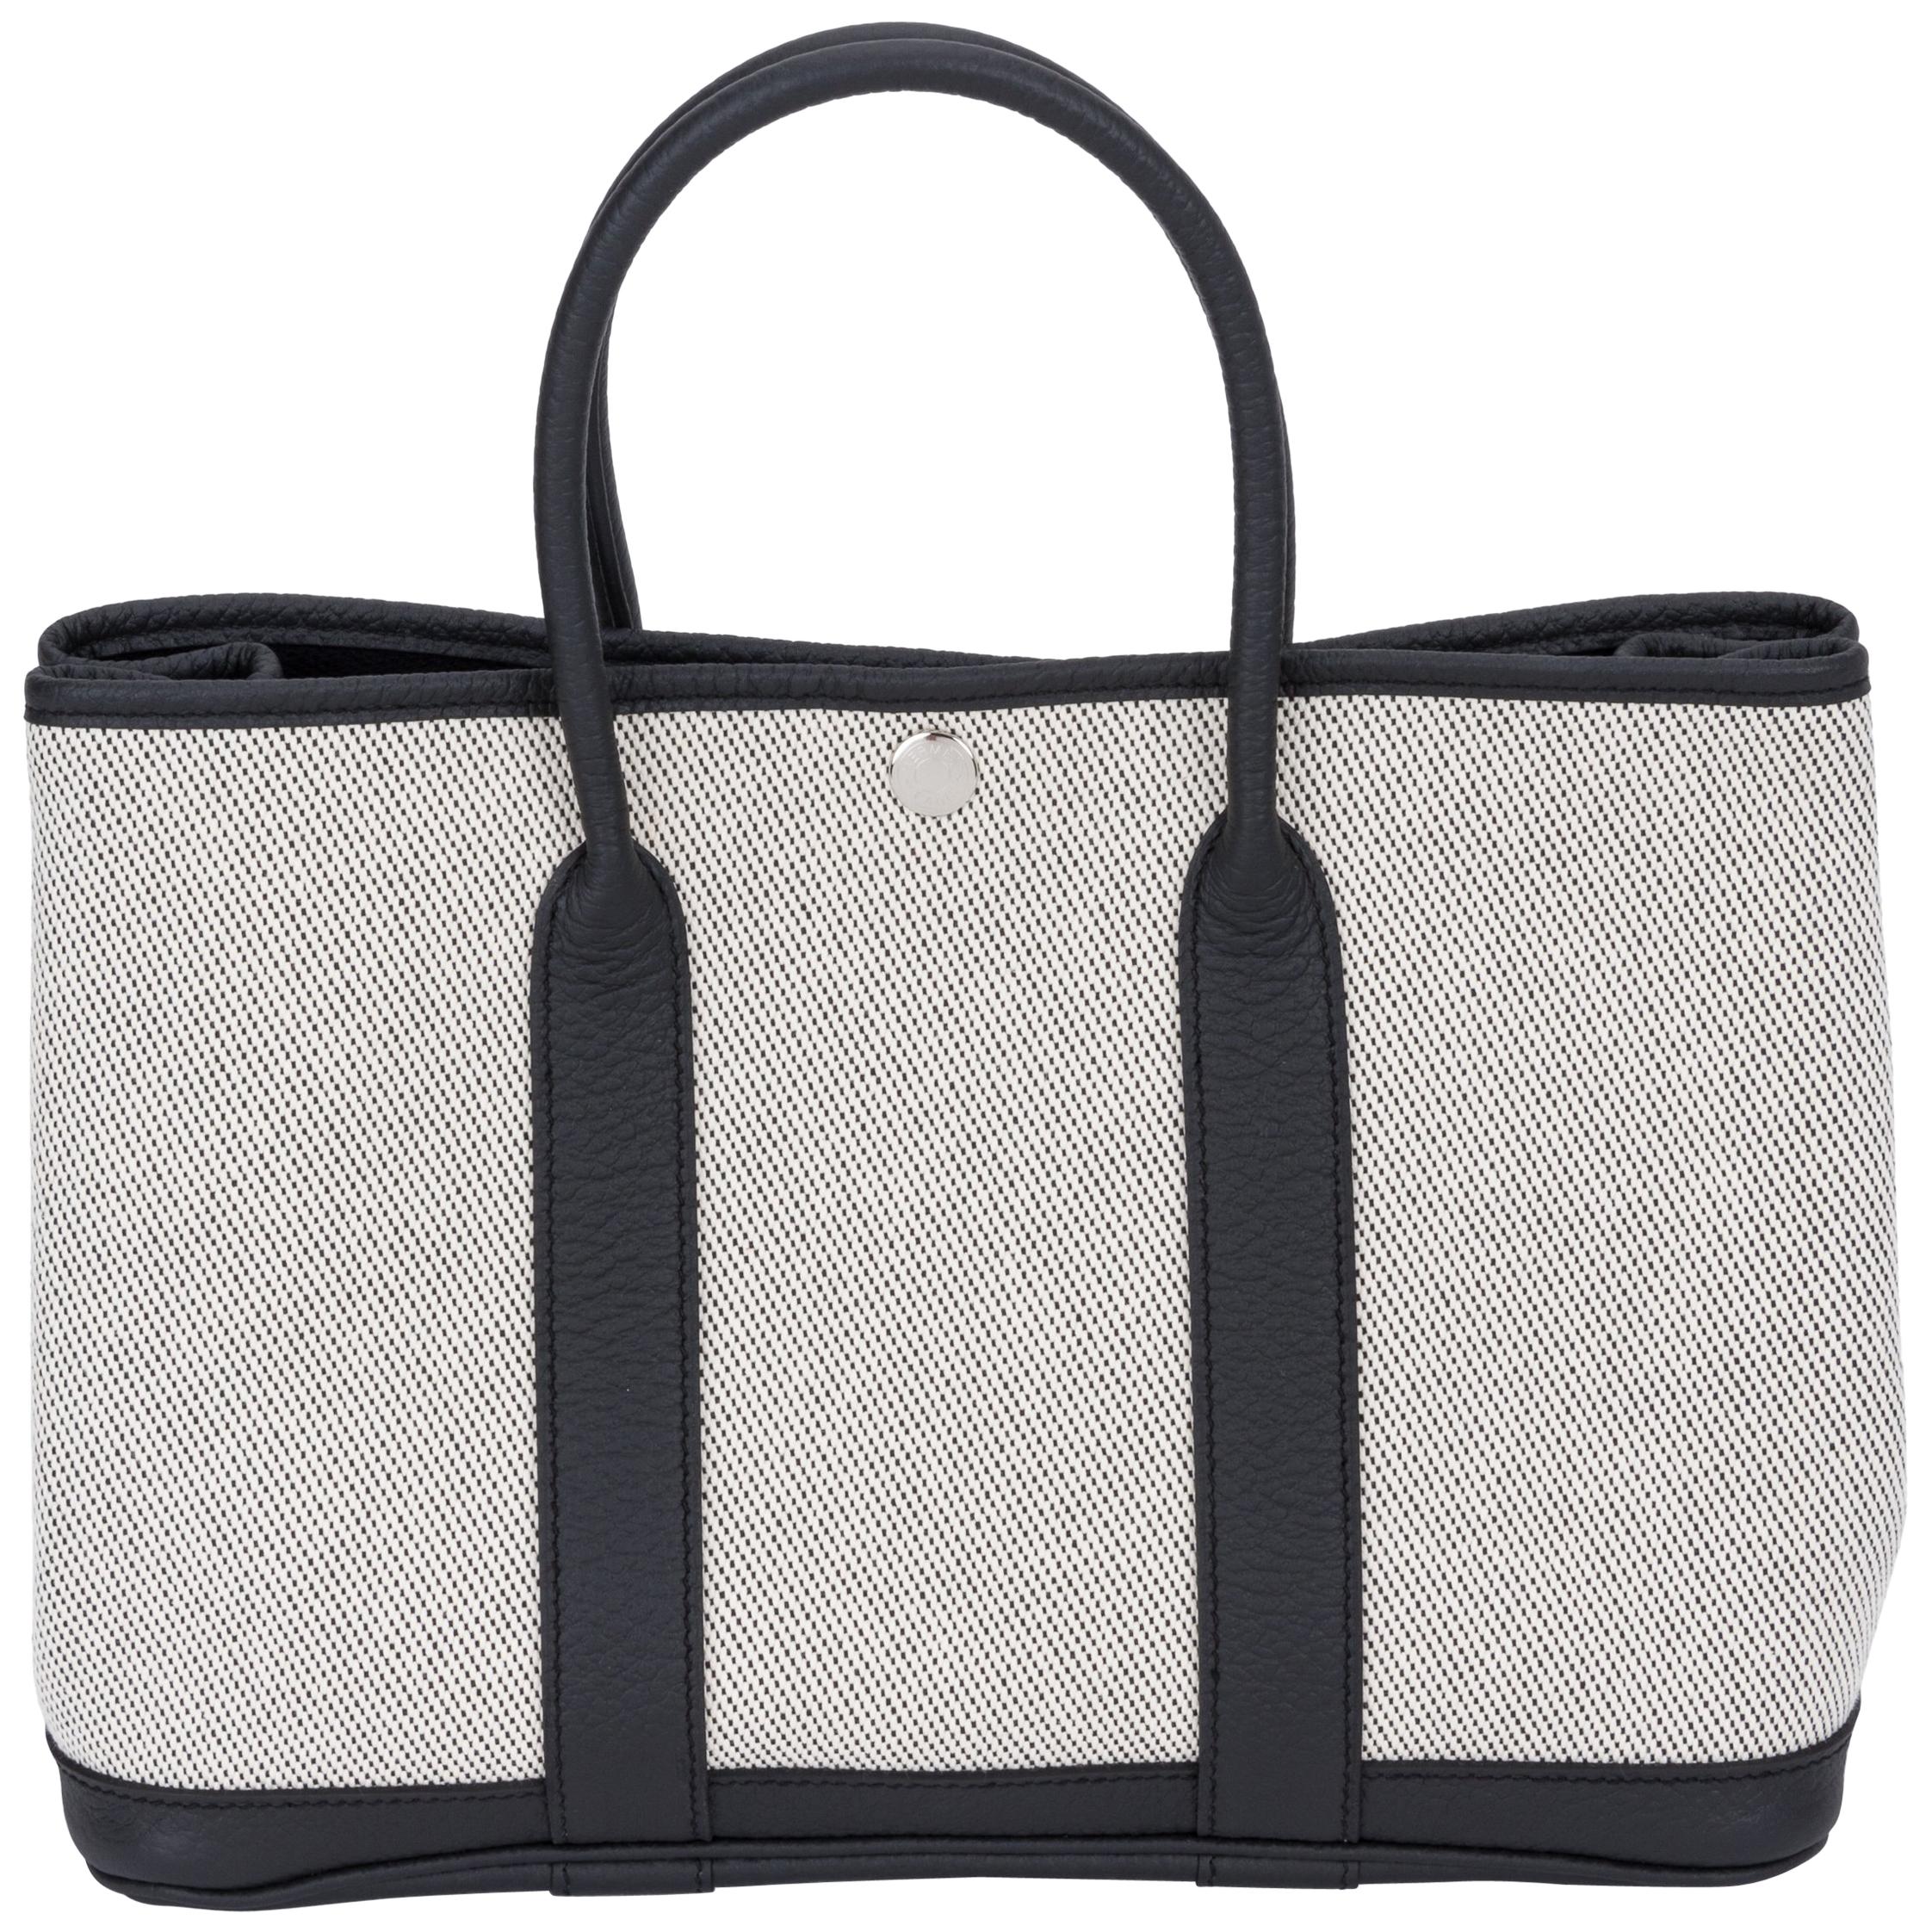 Hermes Ecru and Black Small Garden Party Tote